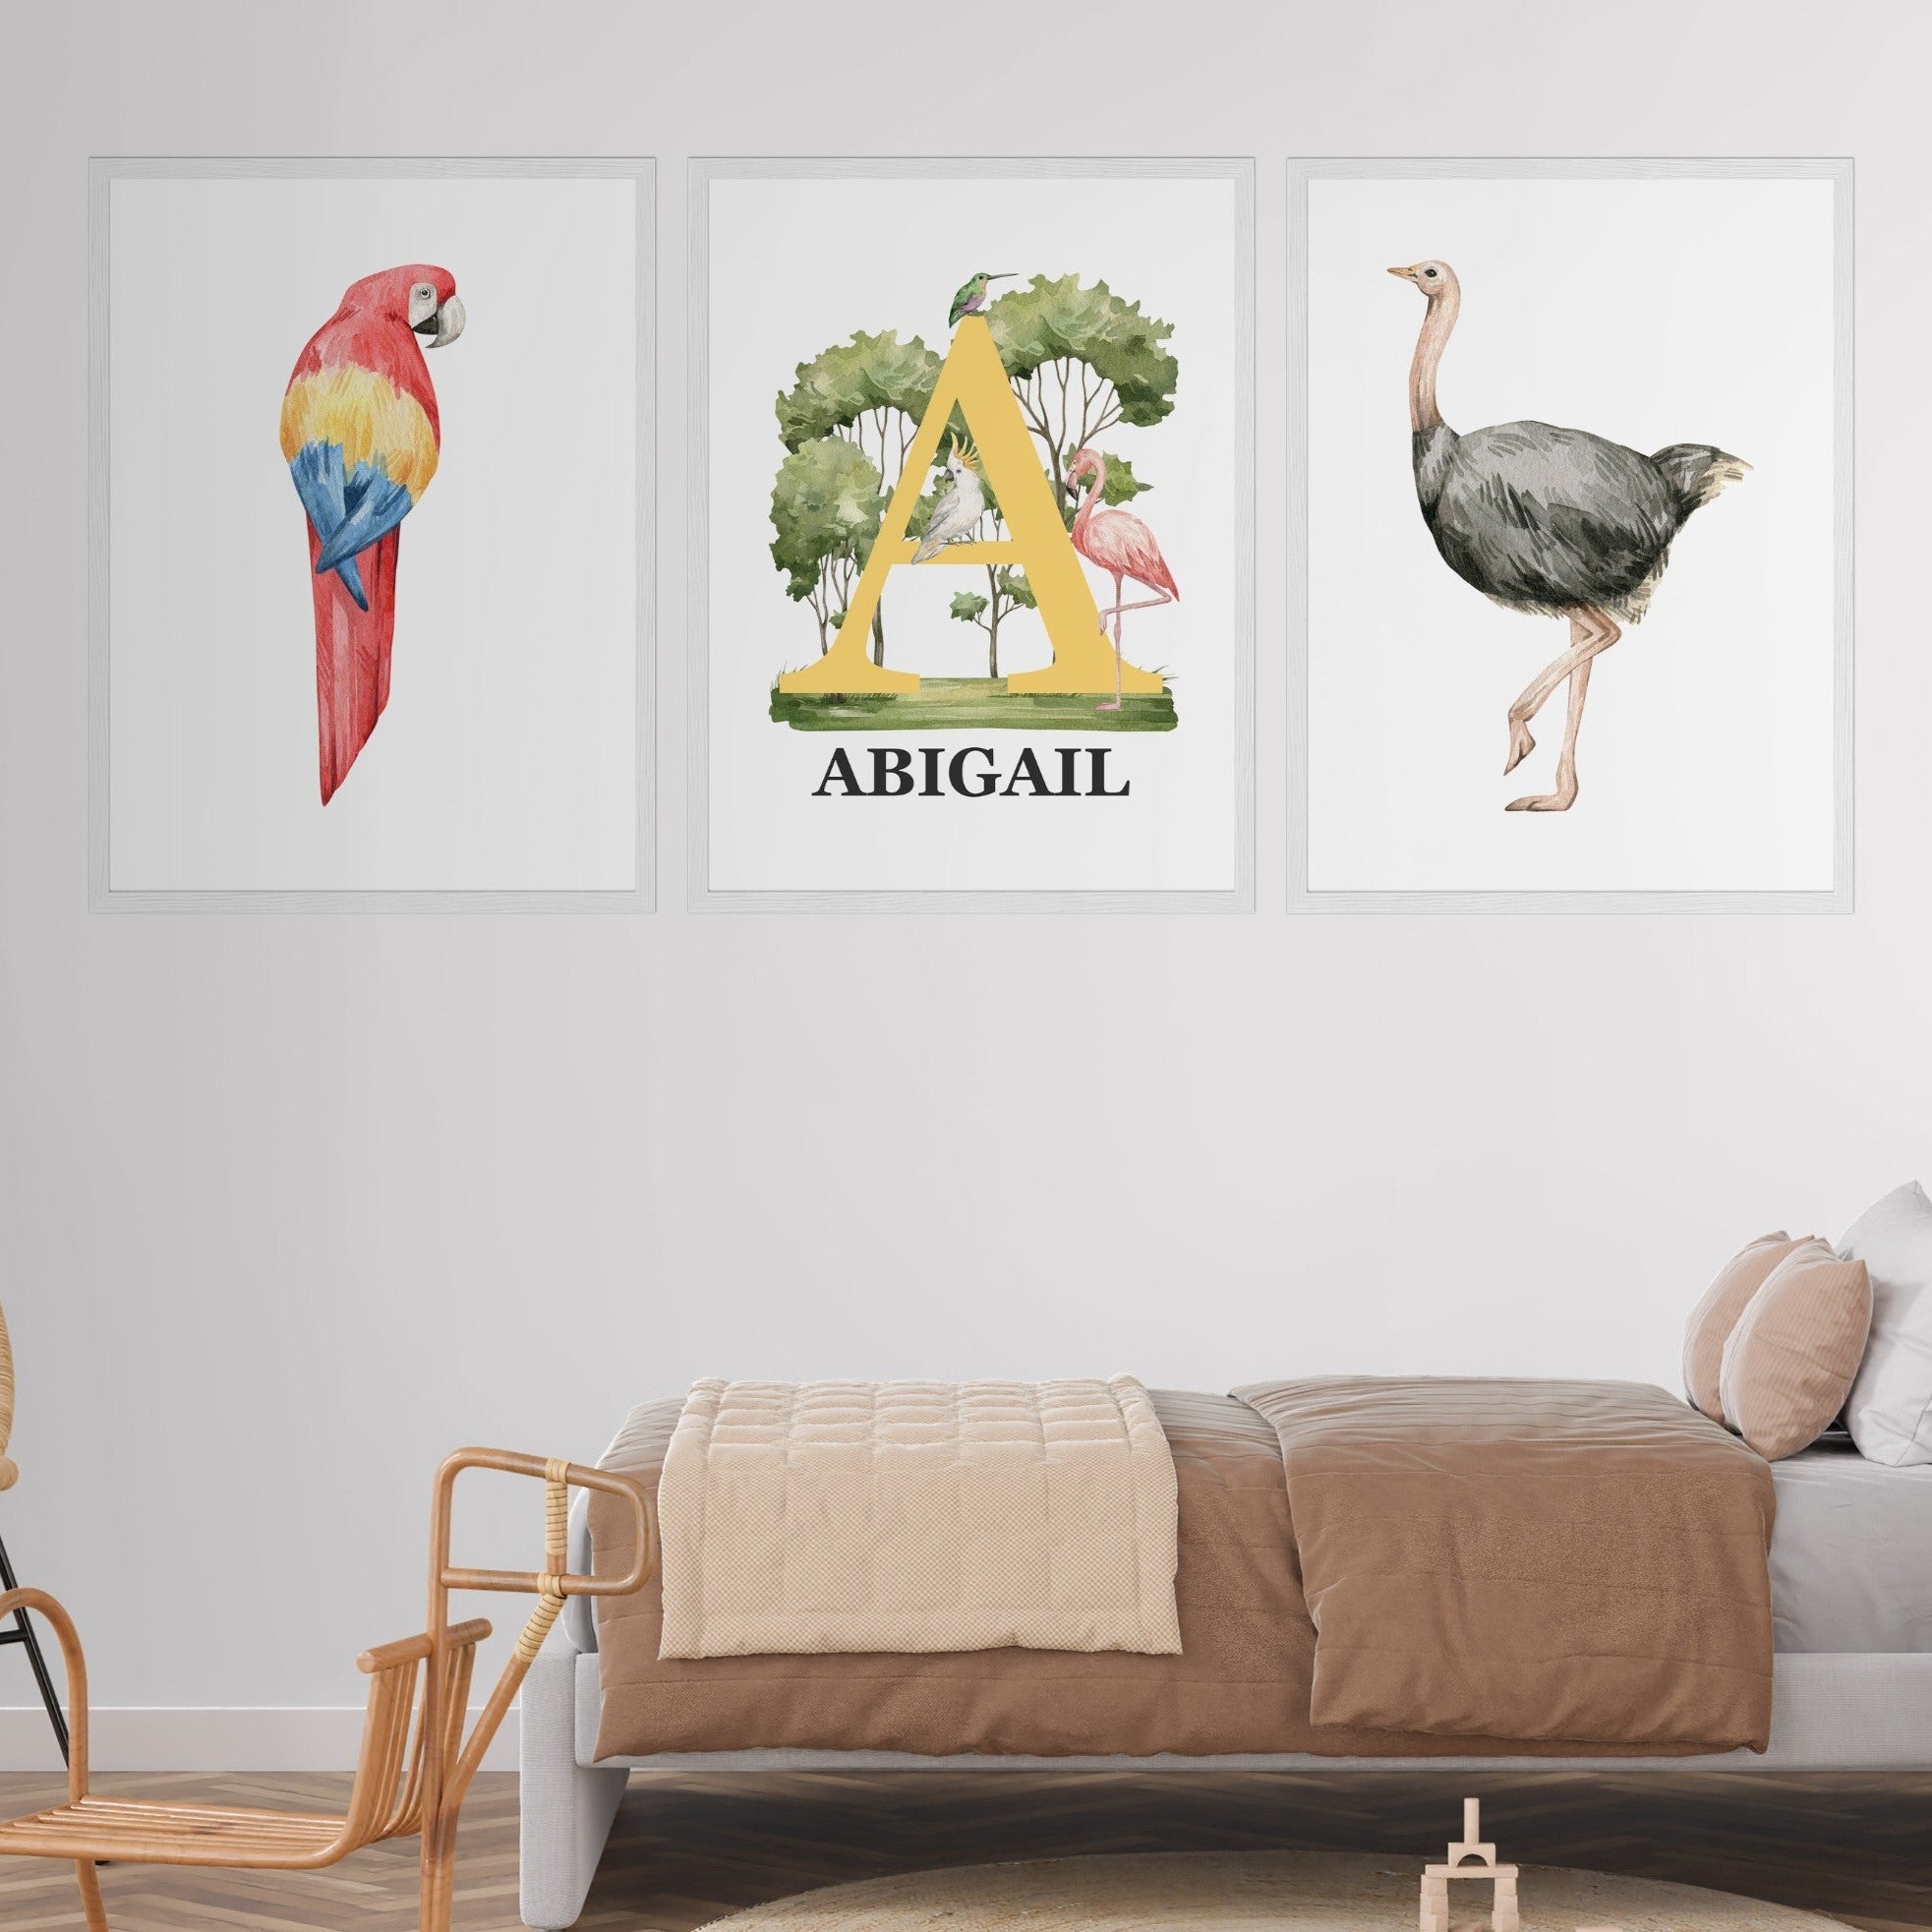 3 Pieces Personalized Birds Wall Art